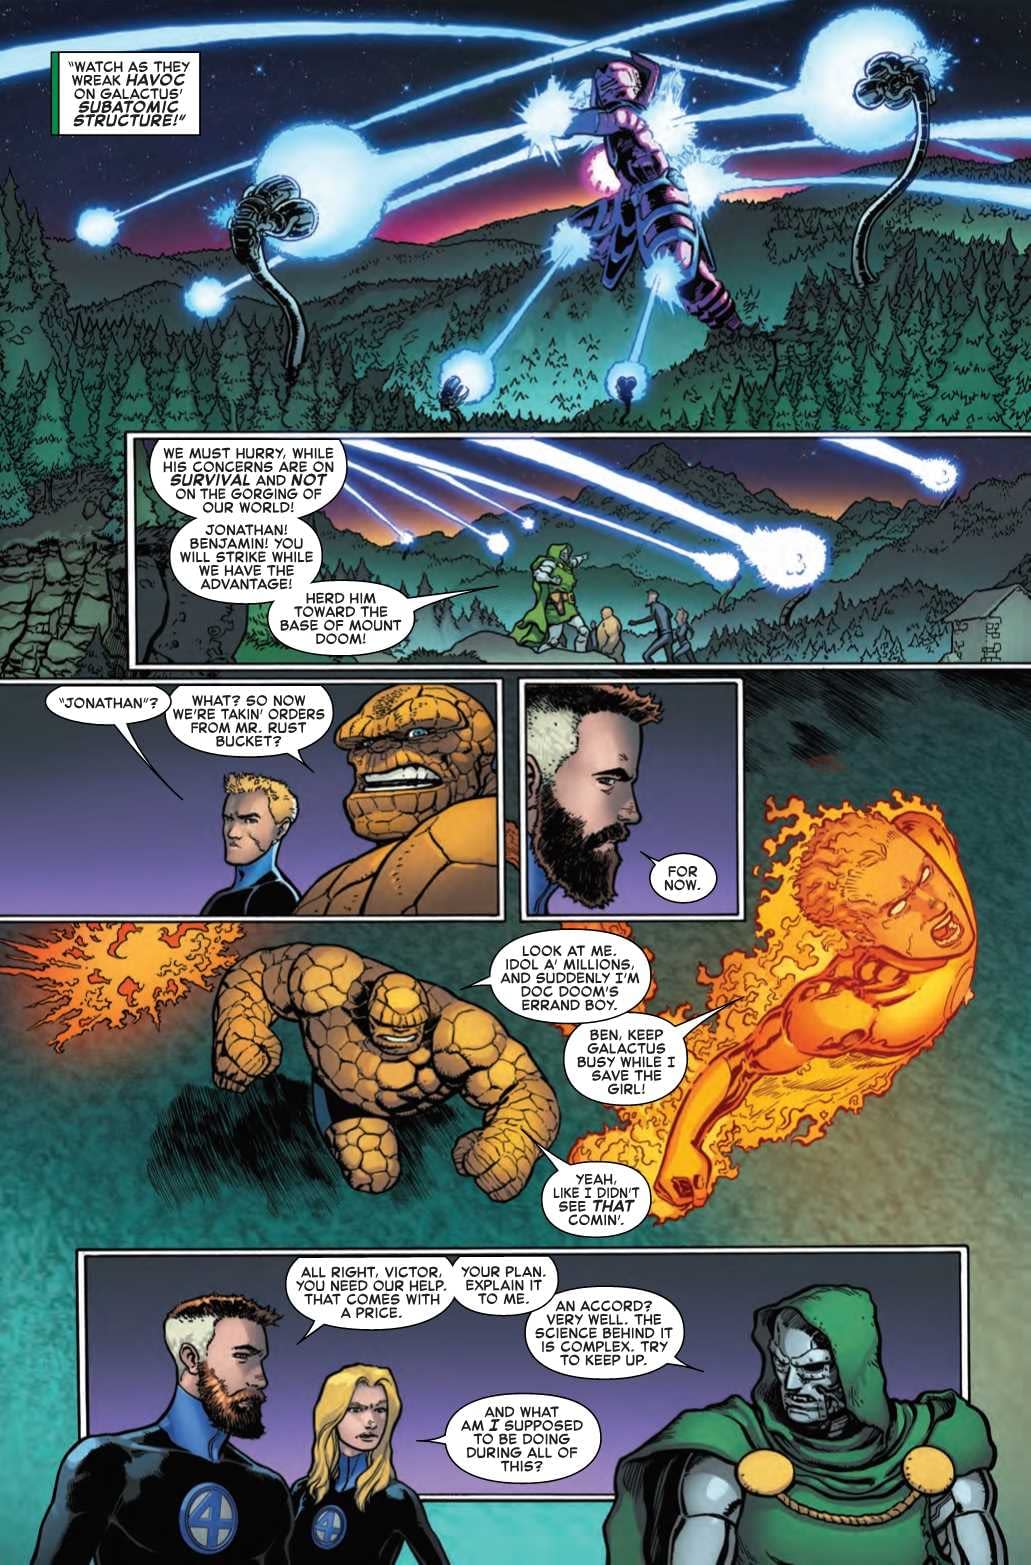 The Fantastic Four Take Orders from Doom in Next Week's Fantastic Four #7